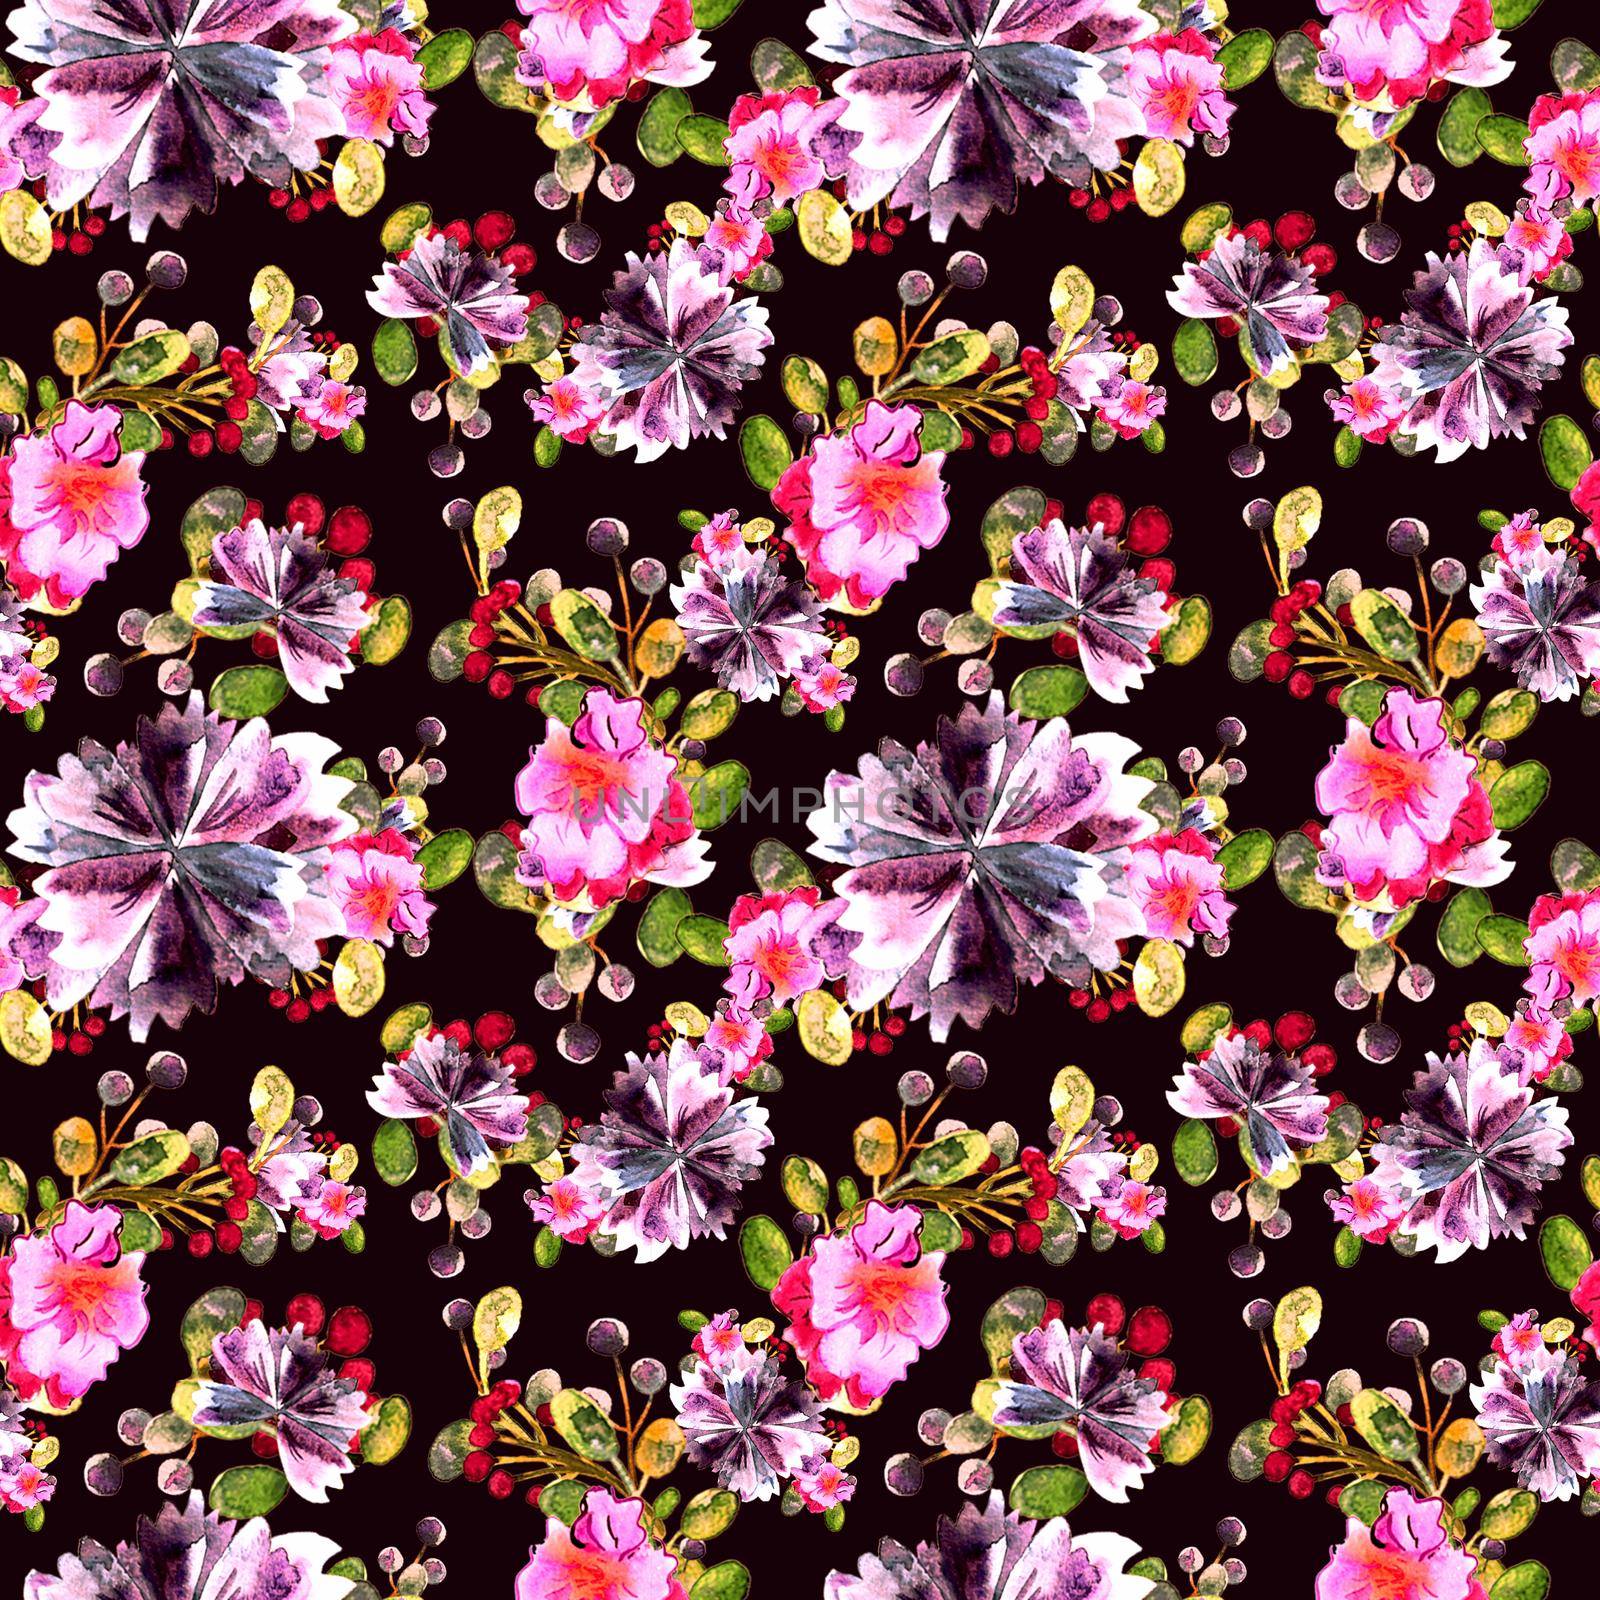 Watercolor floral pattern. Seamless with purple and pink bouquet on dark background. by DesignAB